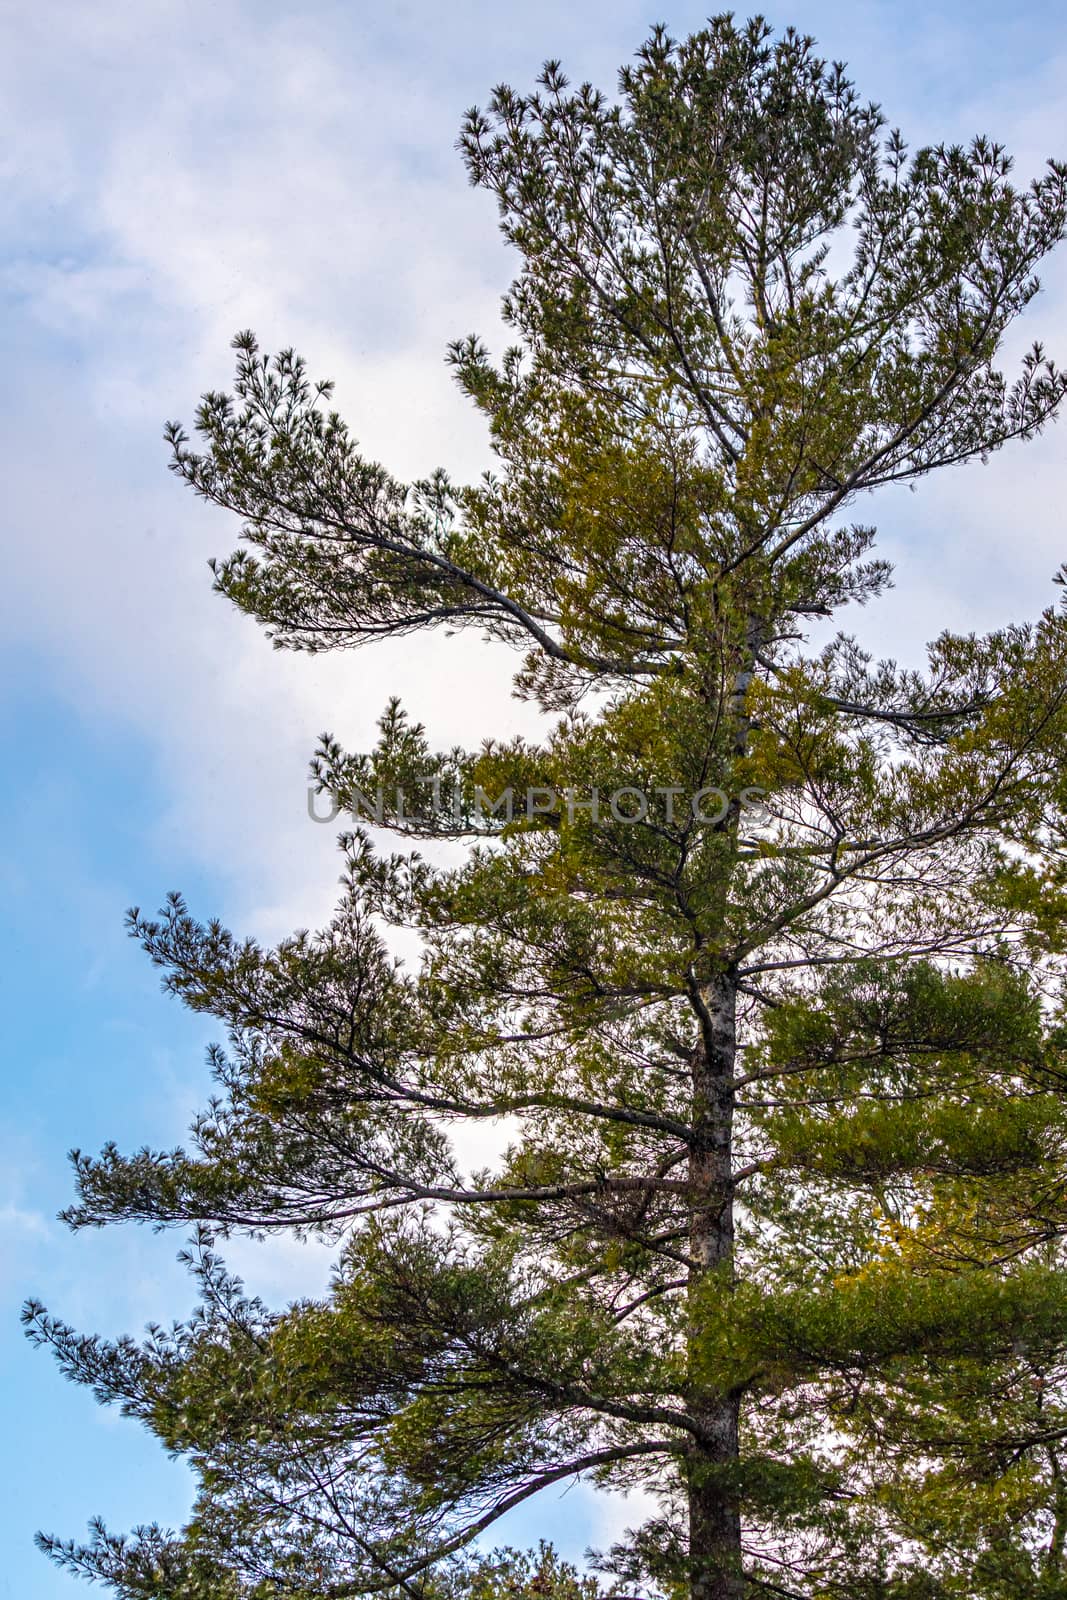 Pine Tree is Evergreen Against a Cloudy Blue Sky by colintemple